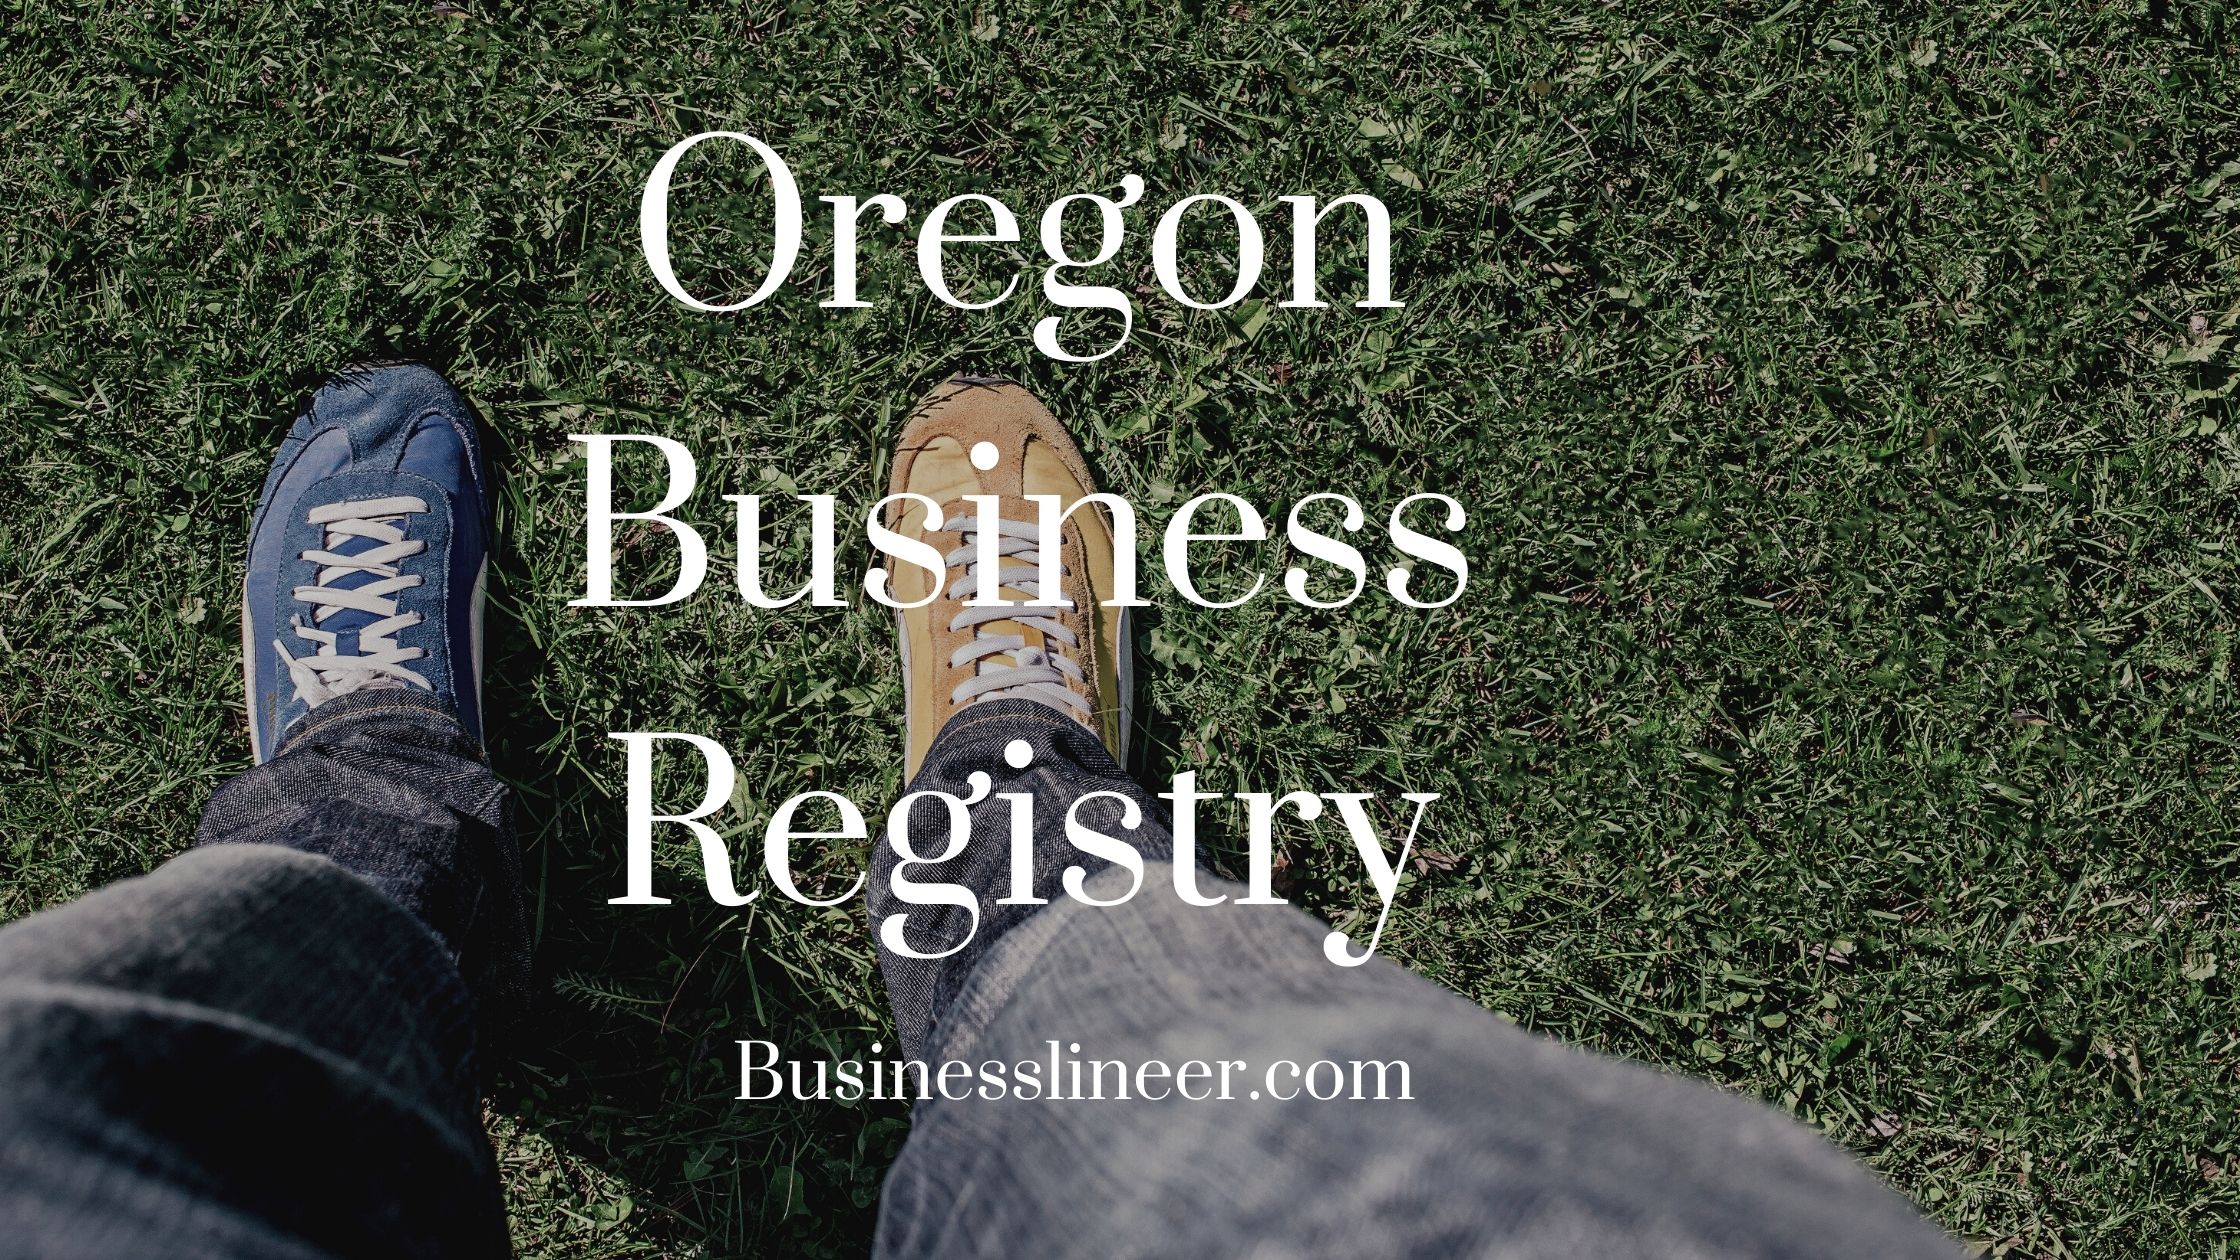 Using Oregon Business Registry to Promote Business